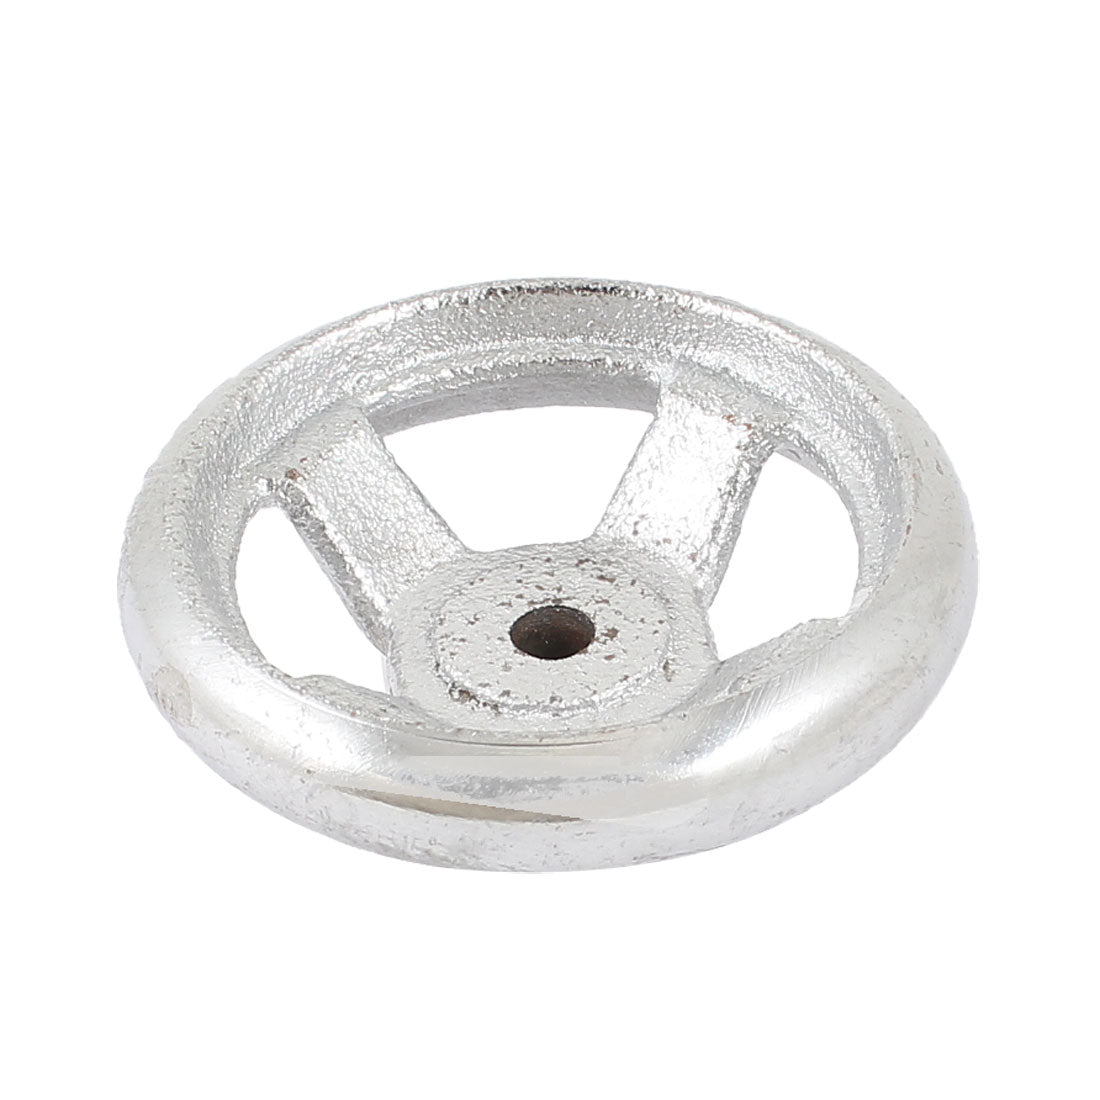 uxcell Uxcell 69mm x 29mm Round Metal Hand Wheel Silver Tone for Milling Machine